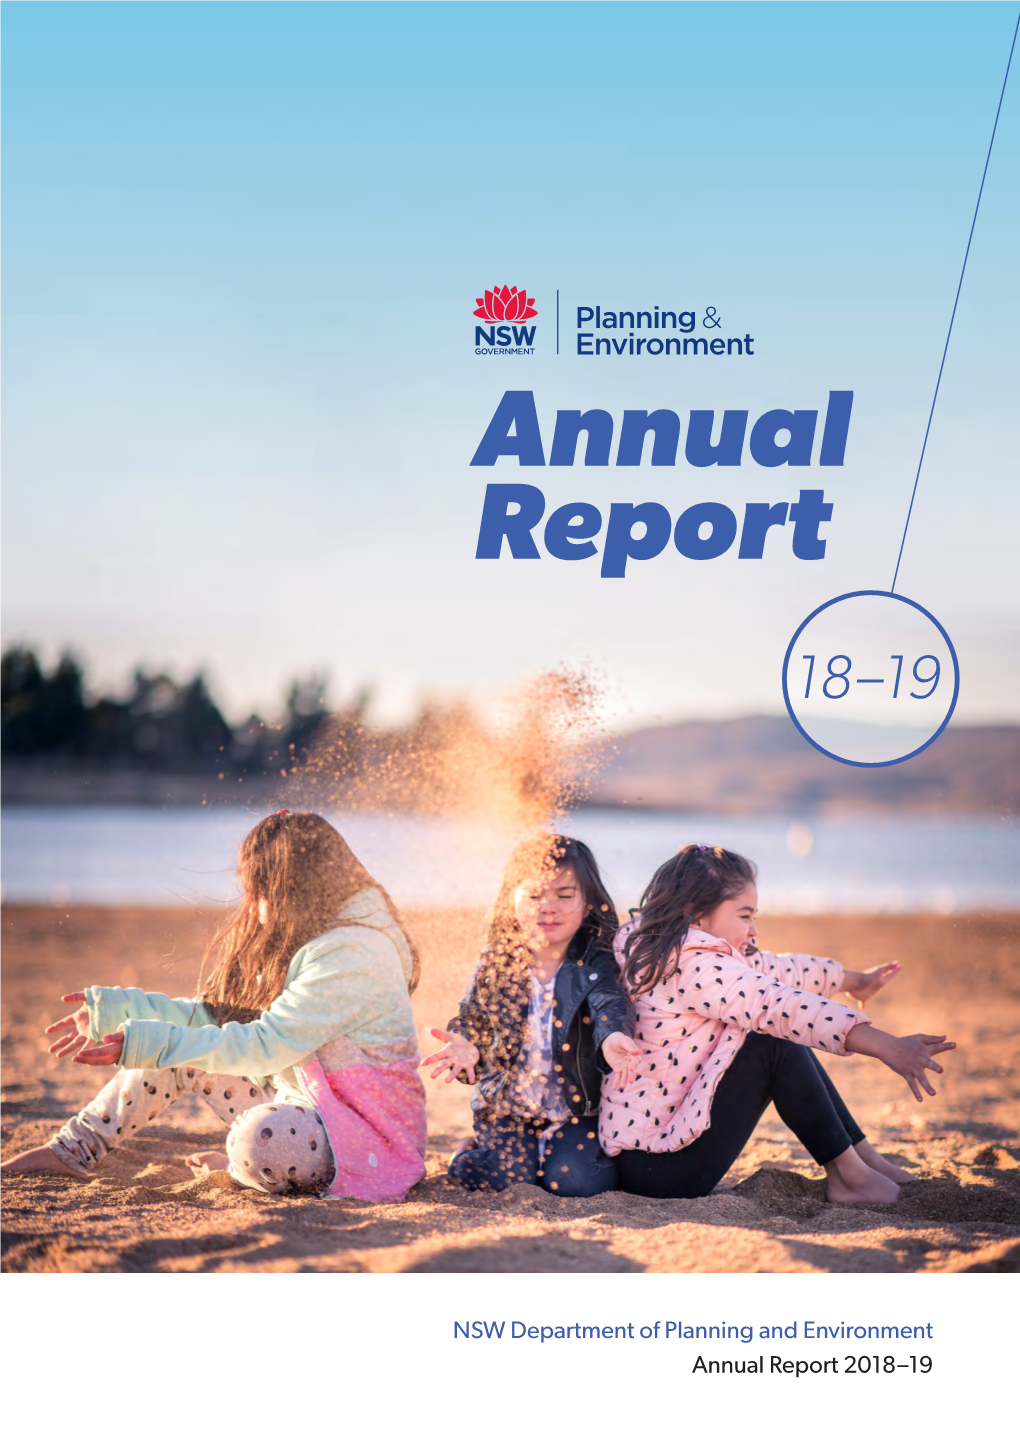 NSW Department of Planning and Environment Annual Report 2018-19